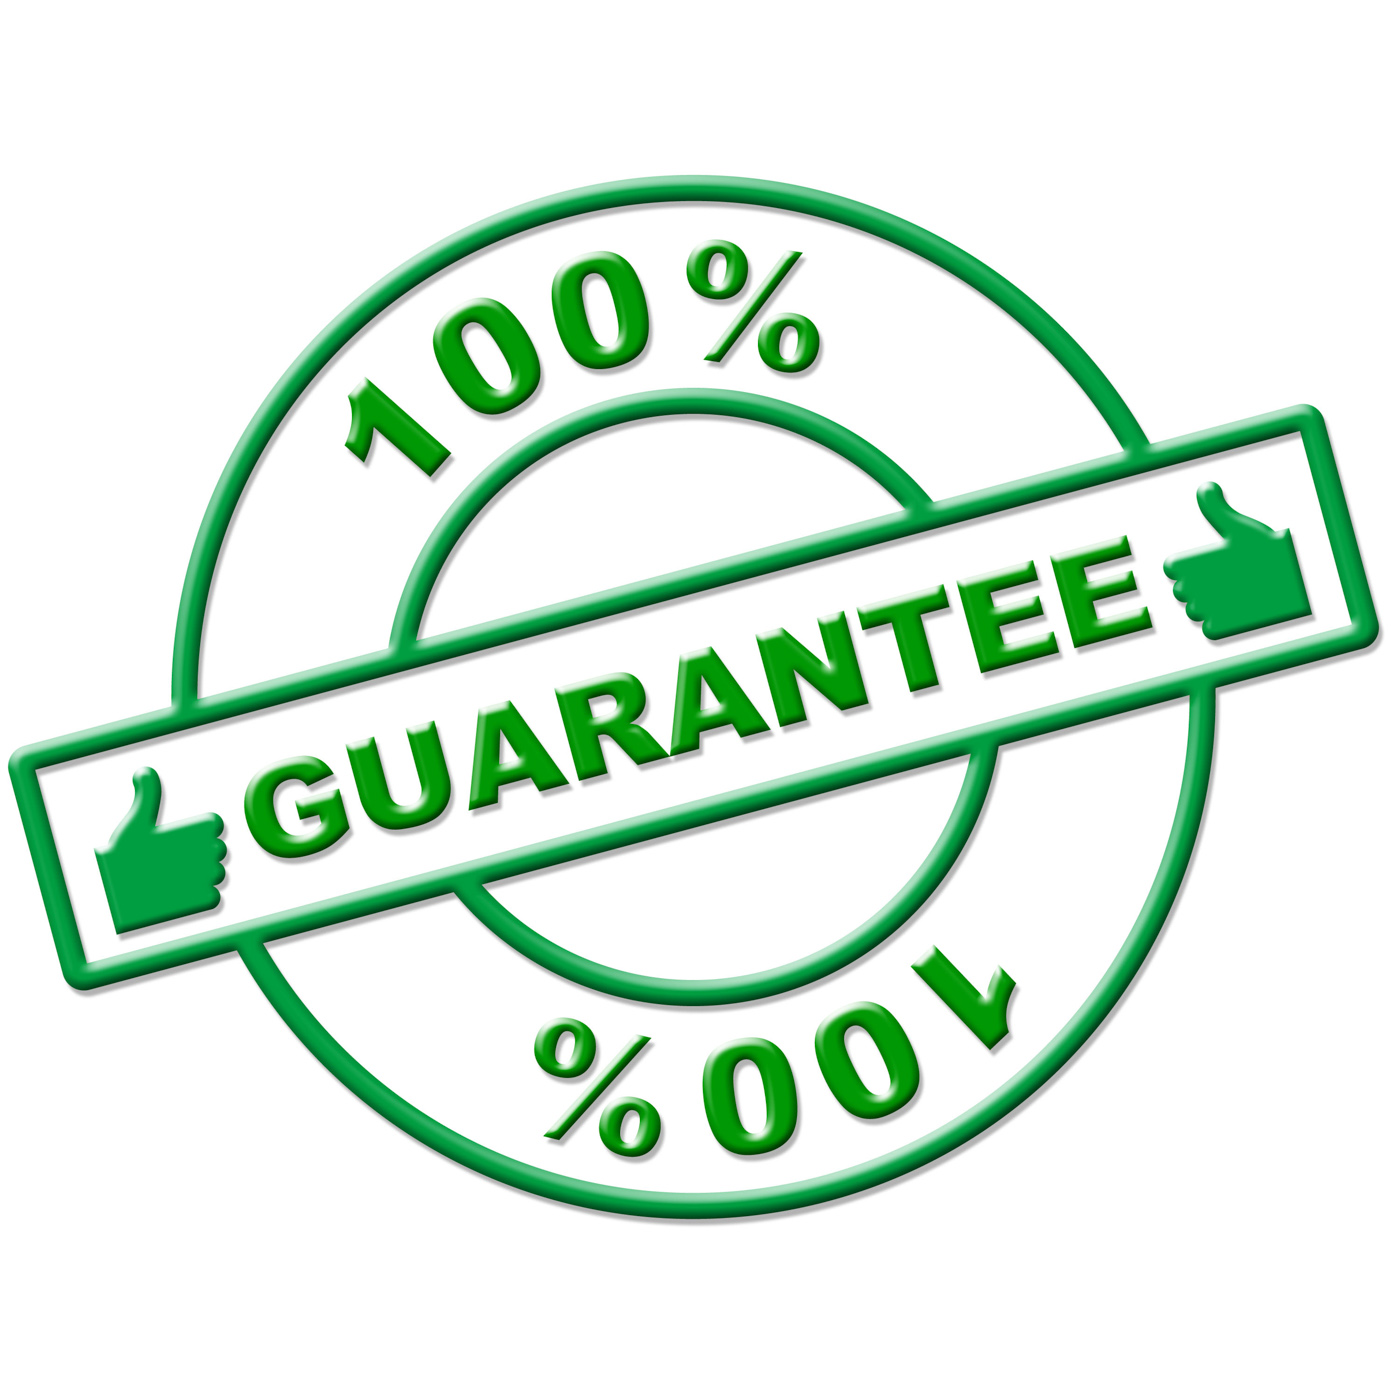 Hundred percent guarantee represents completely promise and ensure photo